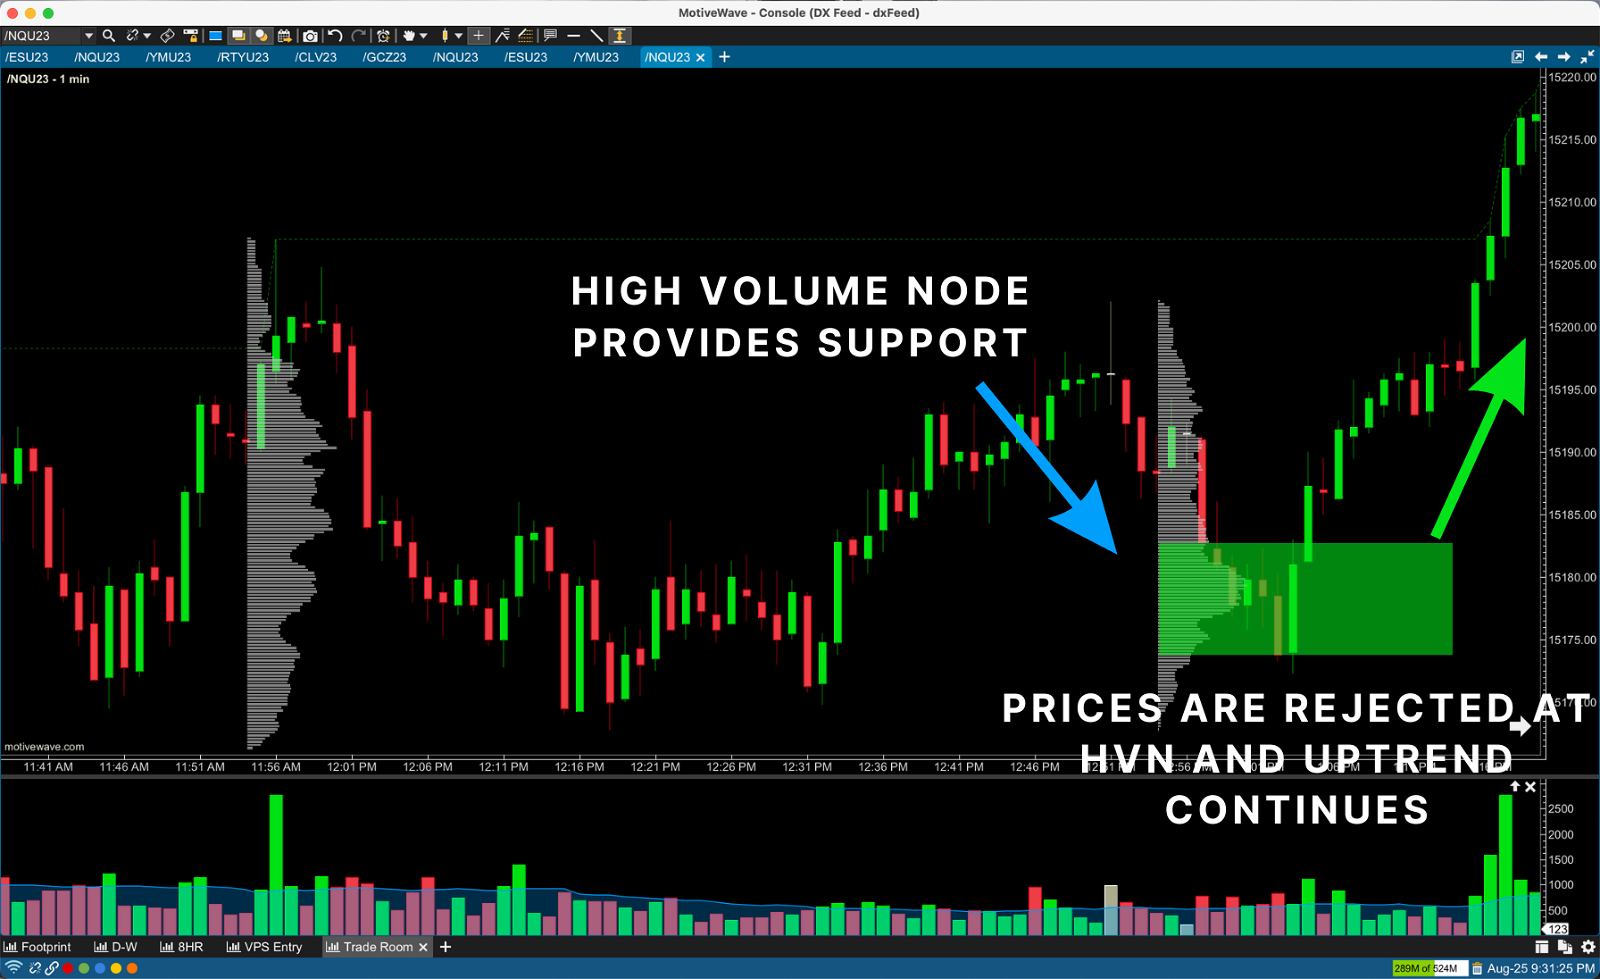 Price retracing and finding support at a High Volume Node.